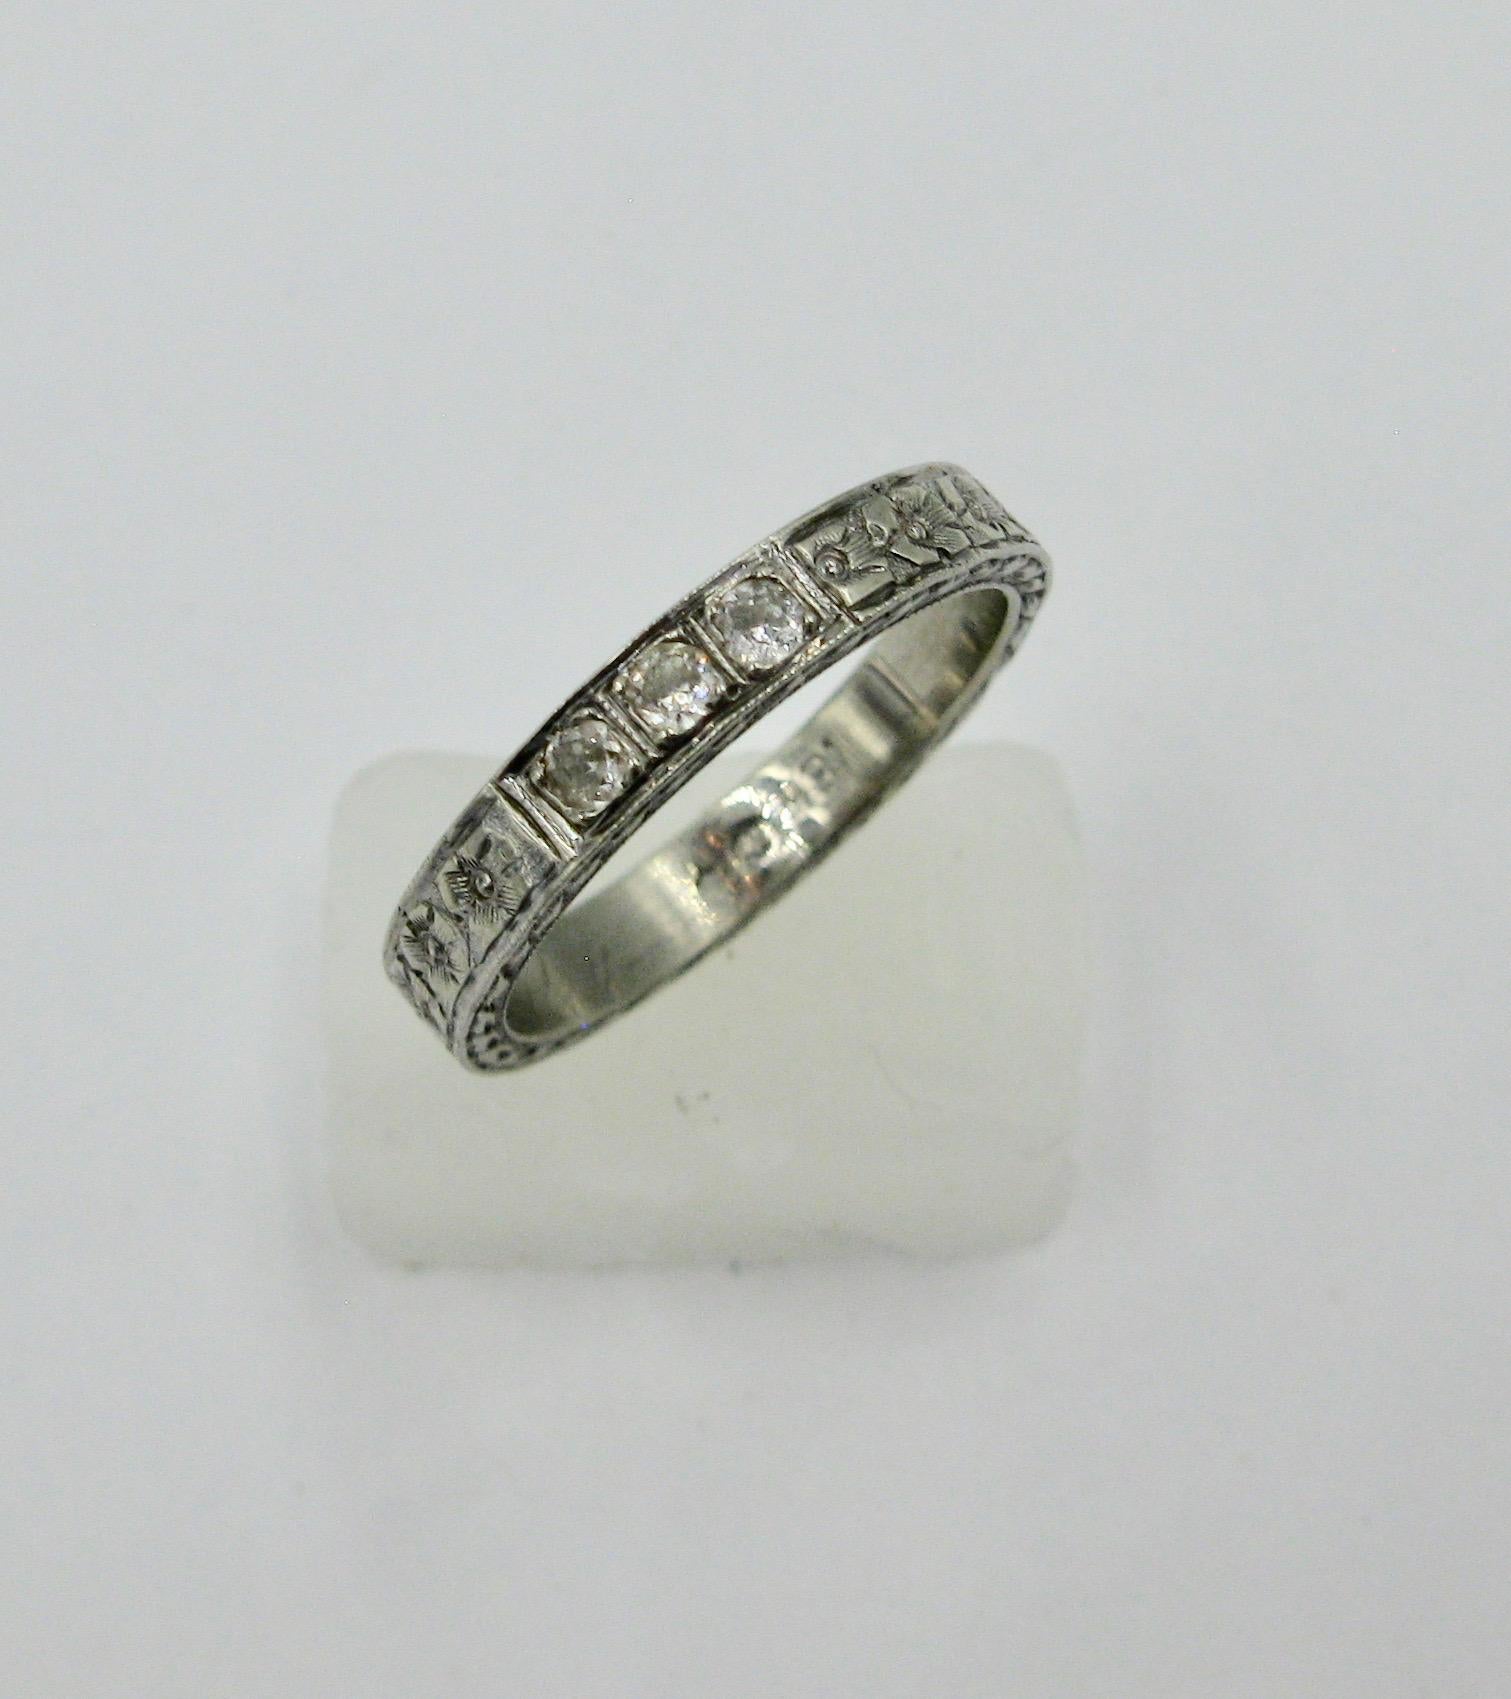 This is a stunning Antique Art Deco Diamond 18 Karat White Gold Wedding Engagement Band Ring.  The gorgeous ring has three gorgeous Old Mine Cut Diamonds set in a highly detailed engraved band with flower motifs and patterns.   A very gorgeous band